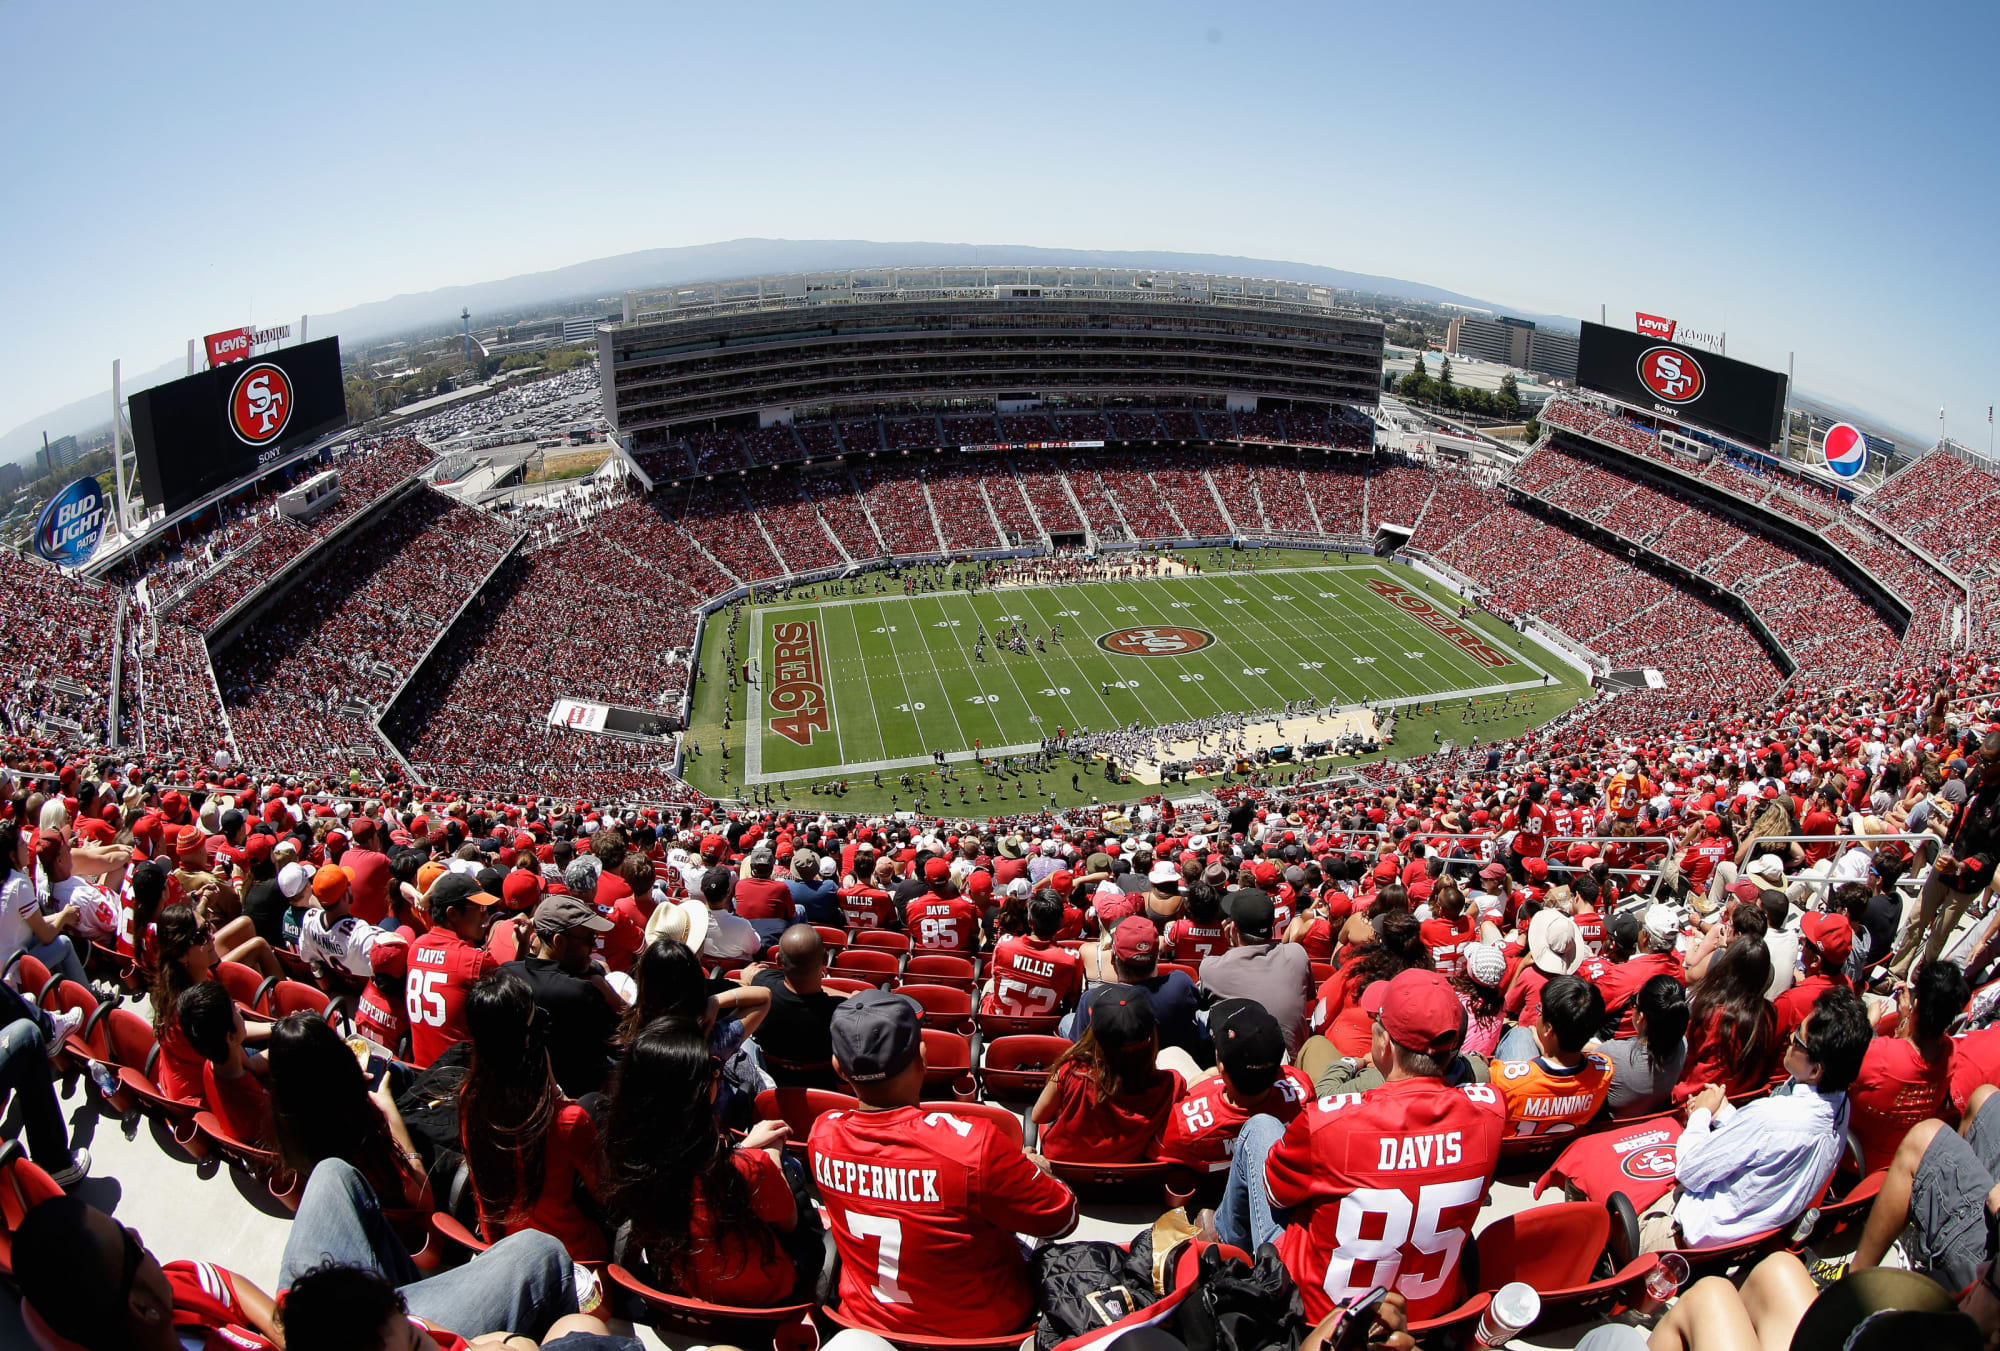 49ers vs. Texans: NFL weather forecast for Week 17 at Levi's Stadium